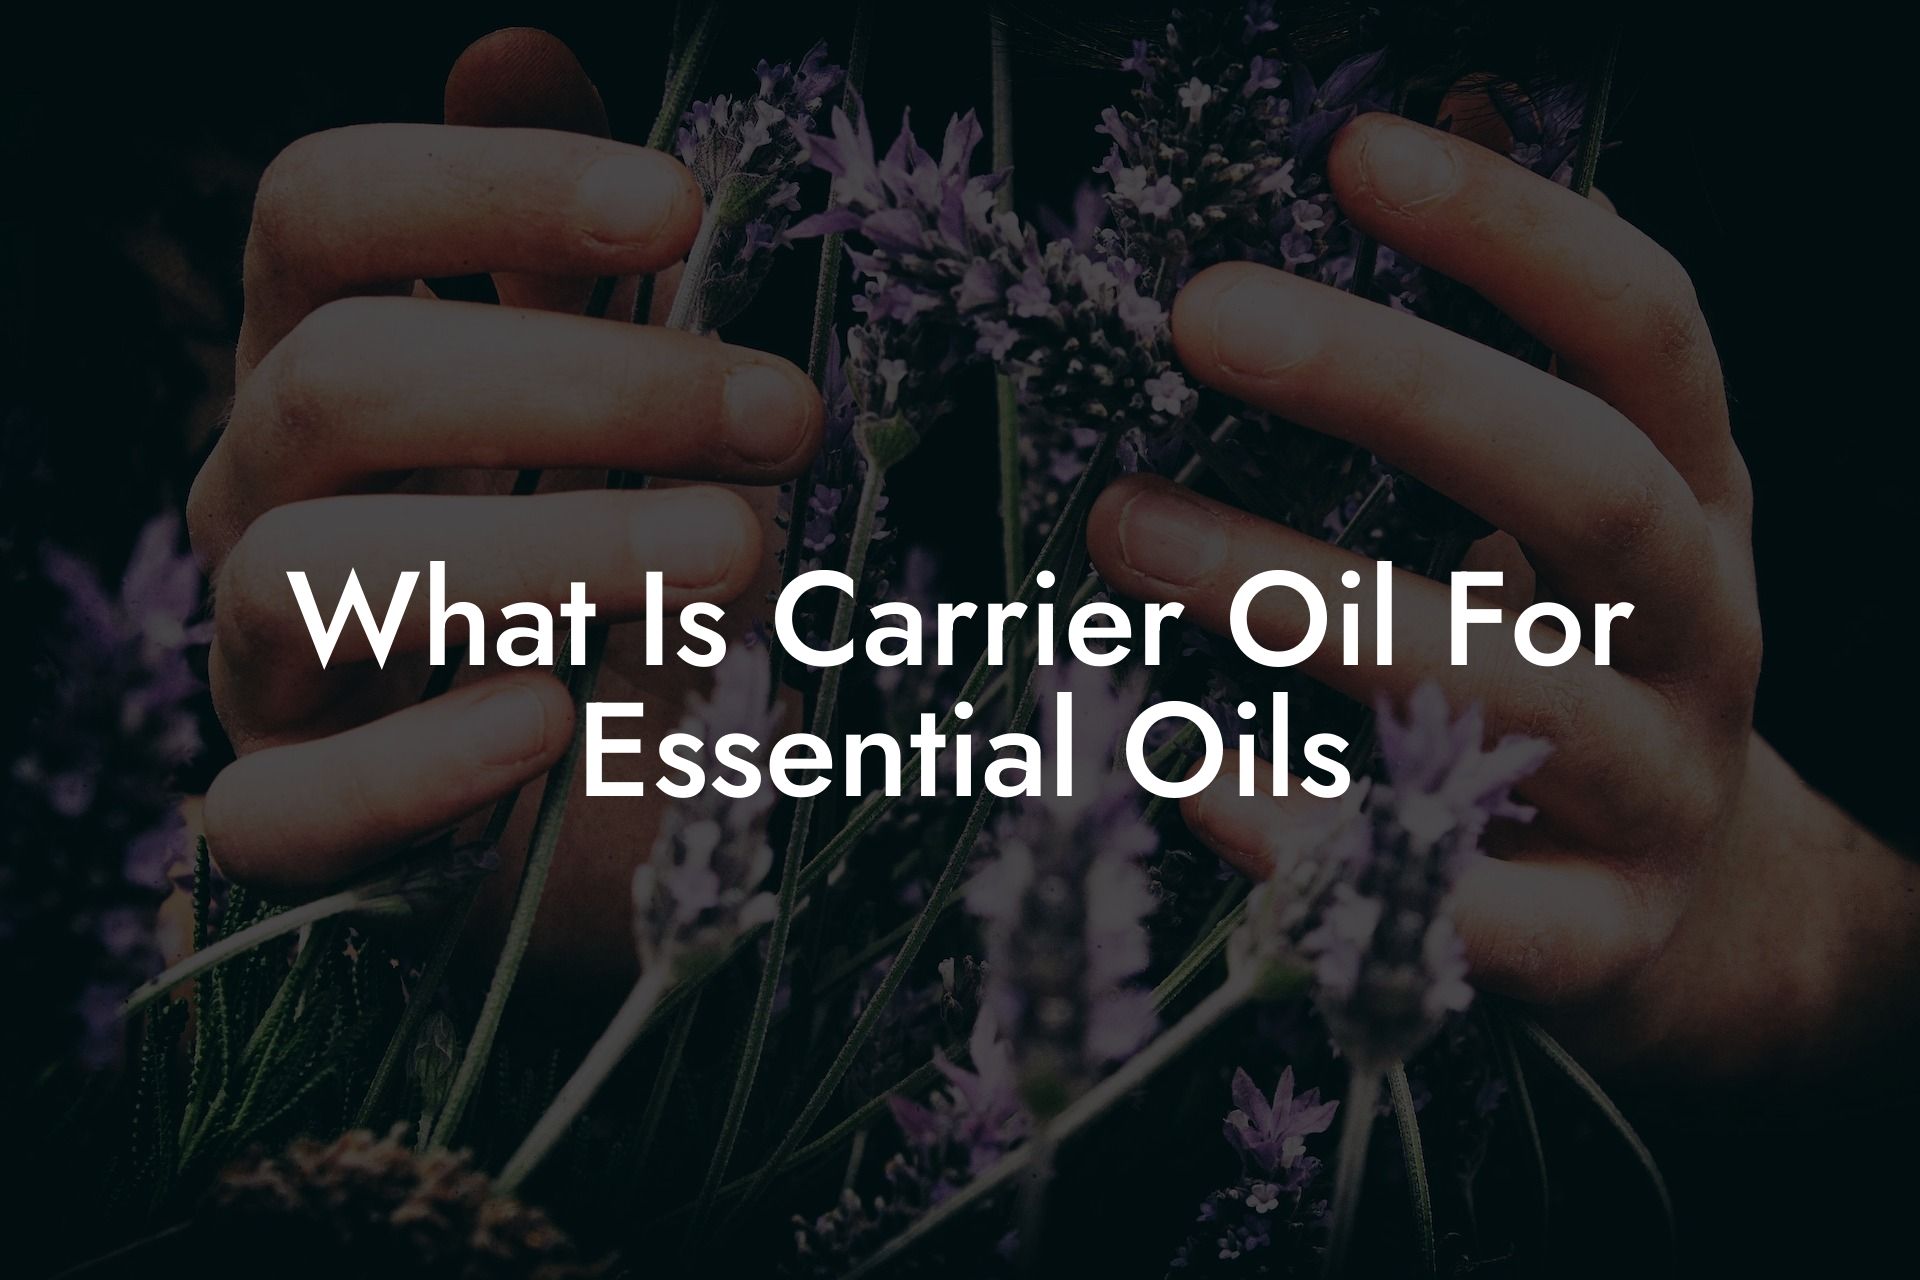 What Is Carrier Oil For Essential Oils